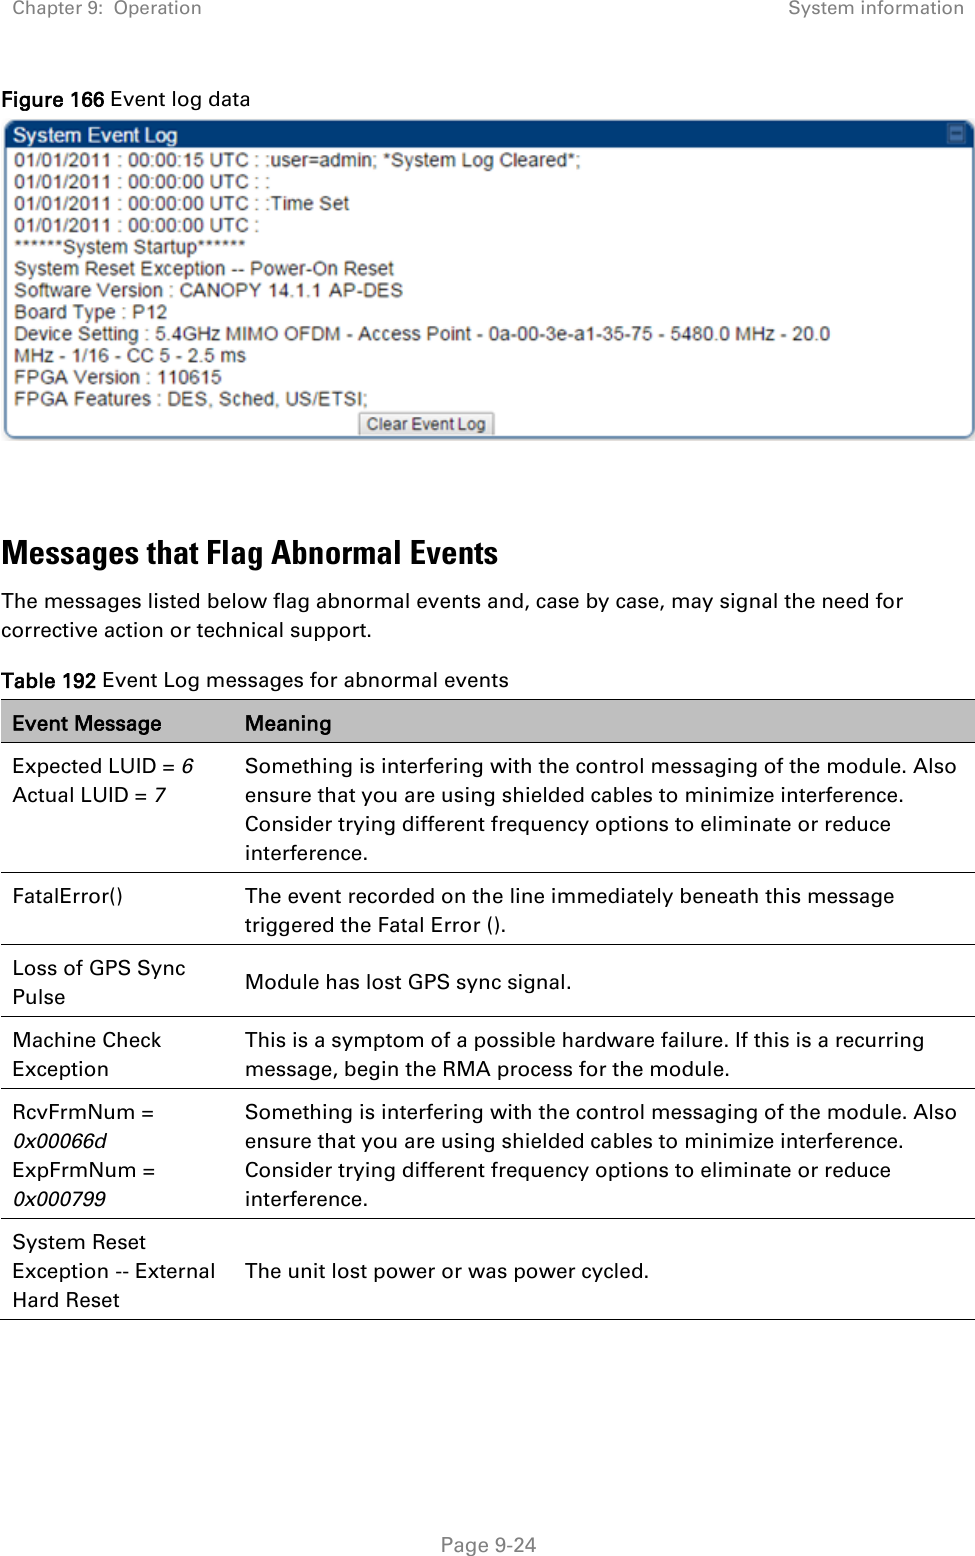 Chapter 9:  Operation System information   Page 9-24 Figure 166 Event log data     Messages that Flag Abnormal Events The messages listed below flag abnormal events and, case by case, may signal the need for corrective action or technical support. Table 192 Event Log messages for abnormal events Event Message Meaning Expected LUID = 6            Actual LUID = 7 Something is interfering with the control messaging of the module. Also ensure that you are using shielded cables to minimize interference. Consider trying different frequency options to eliminate or reduce interference. FatalError() The event recorded on the line immediately beneath this message triggered the Fatal Error (). Loss of GPS Sync Pulse Module has lost GPS sync signal. Machine Check Exception This is a symptom of a possible hardware failure. If this is a recurring message, begin the RMA process for the module. RcvFrmNum = 0x00066d ExpFrmNum = 0x000799 Something is interfering with the control messaging of the module. Also ensure that you are using shielded cables to minimize interference. Consider trying different frequency options to eliminate or reduce interference. System Reset Exception -- External Hard Reset The unit lost power or was power cycled. 